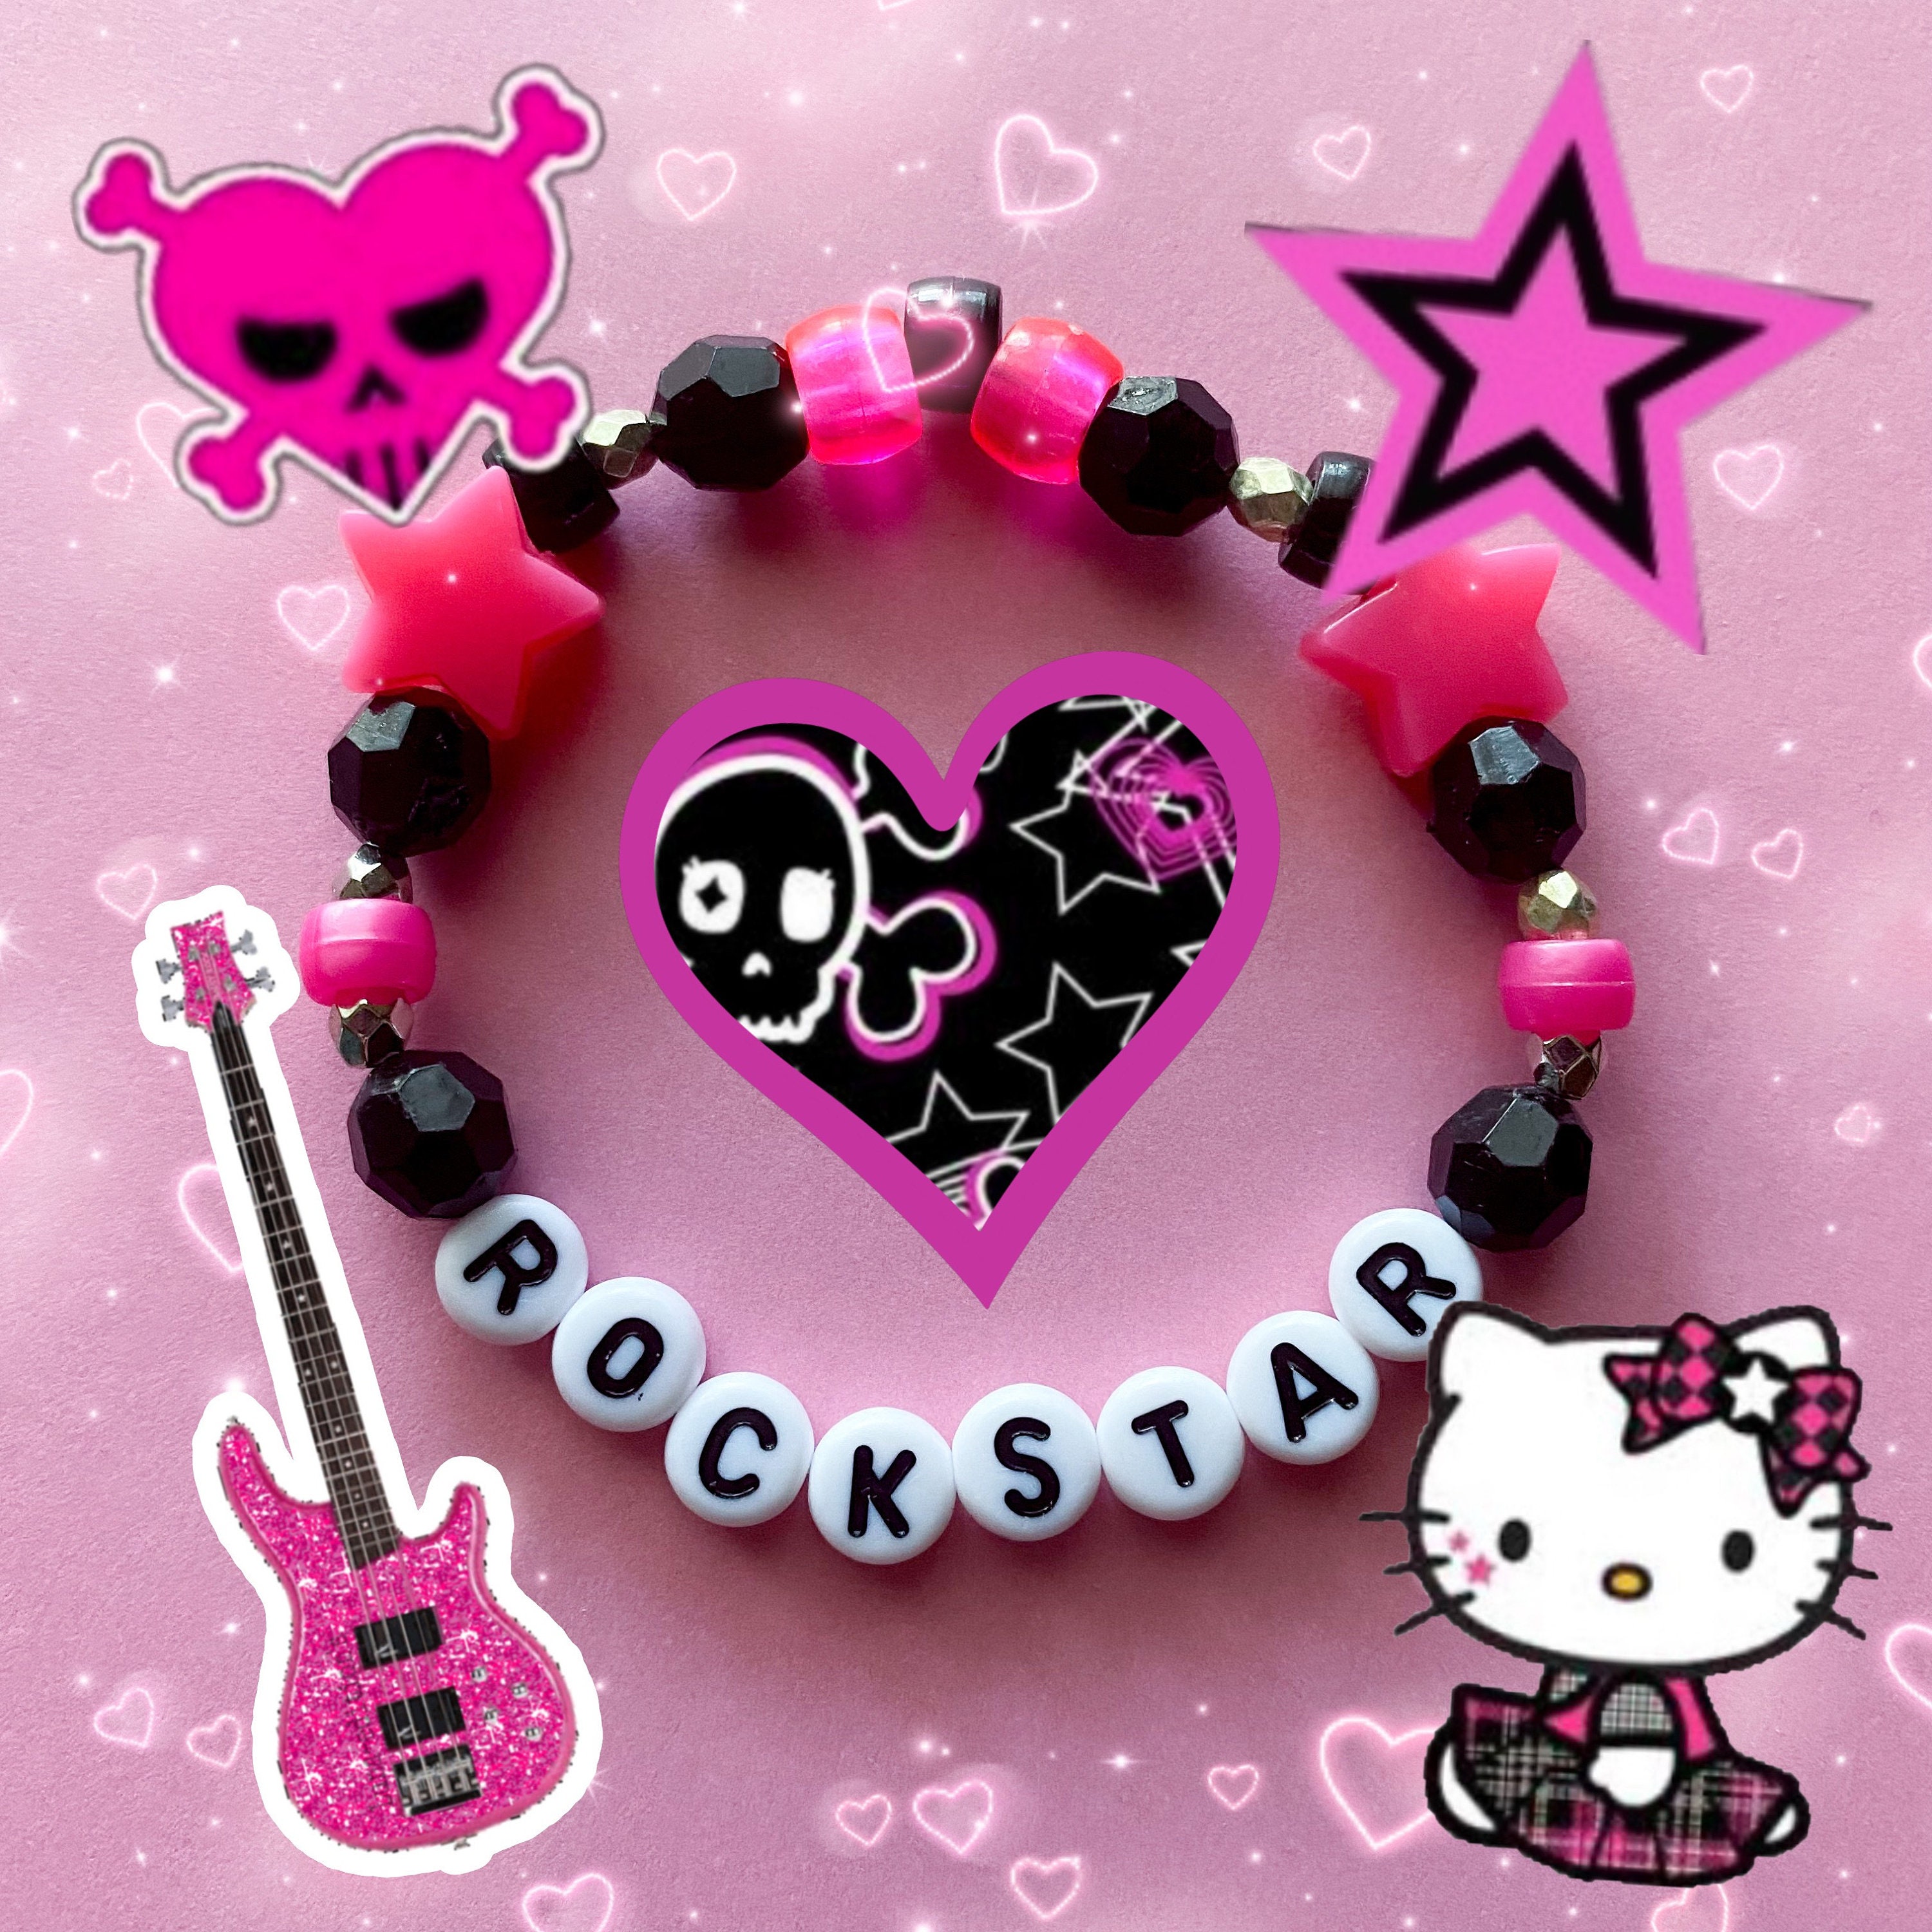 Cute goth stock image. Image of gothic, pink, bracelet - 14542397